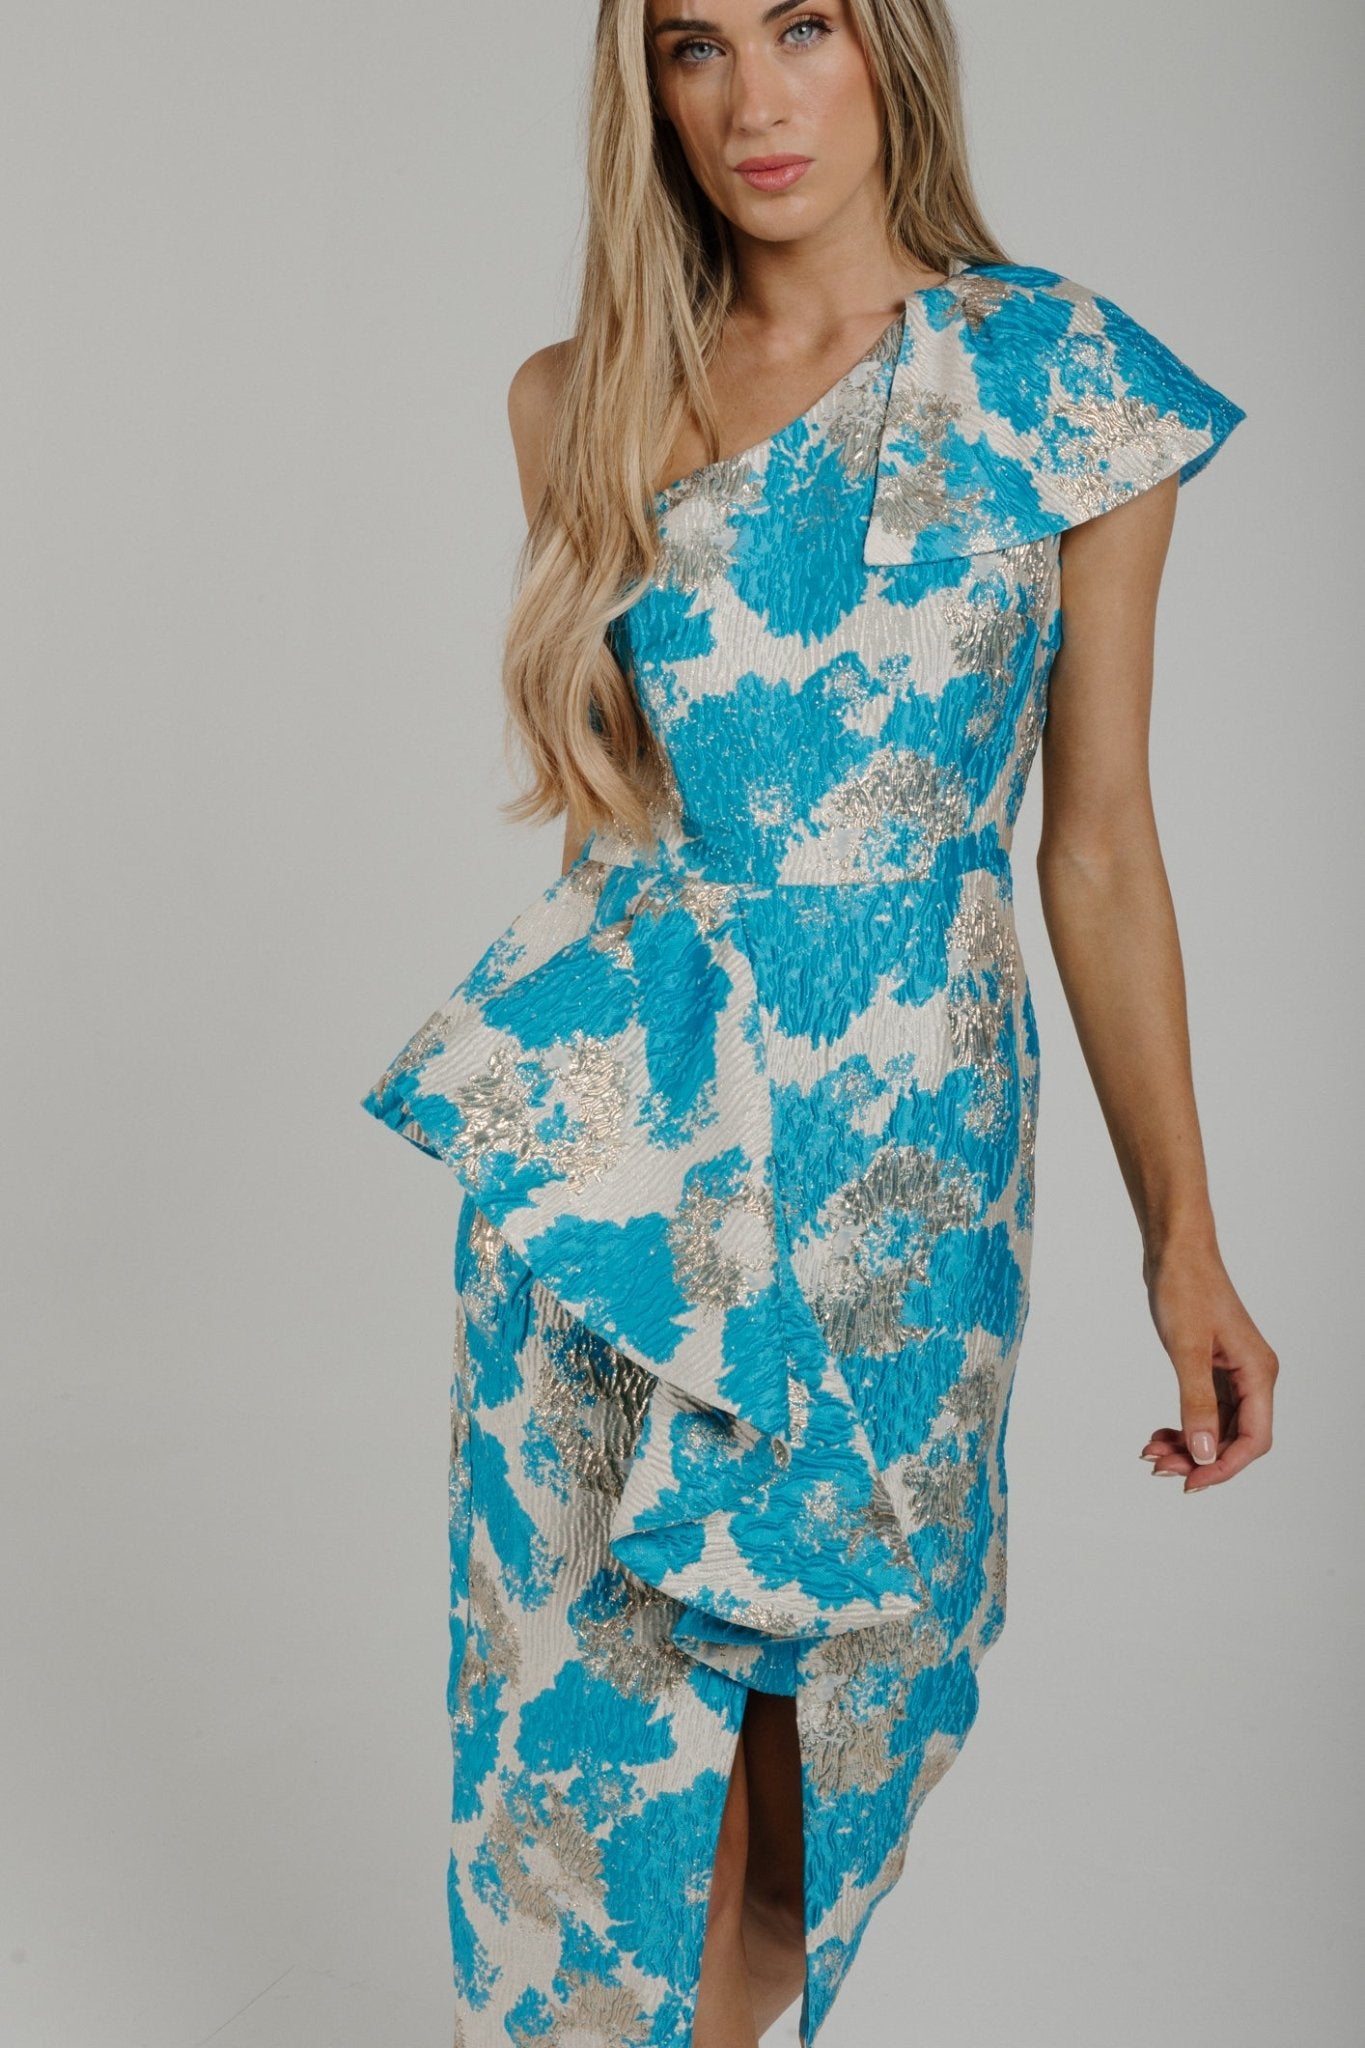 Holly One Shoulder Frill Detail Dress In Blue Mix - The Walk in Wardrobe